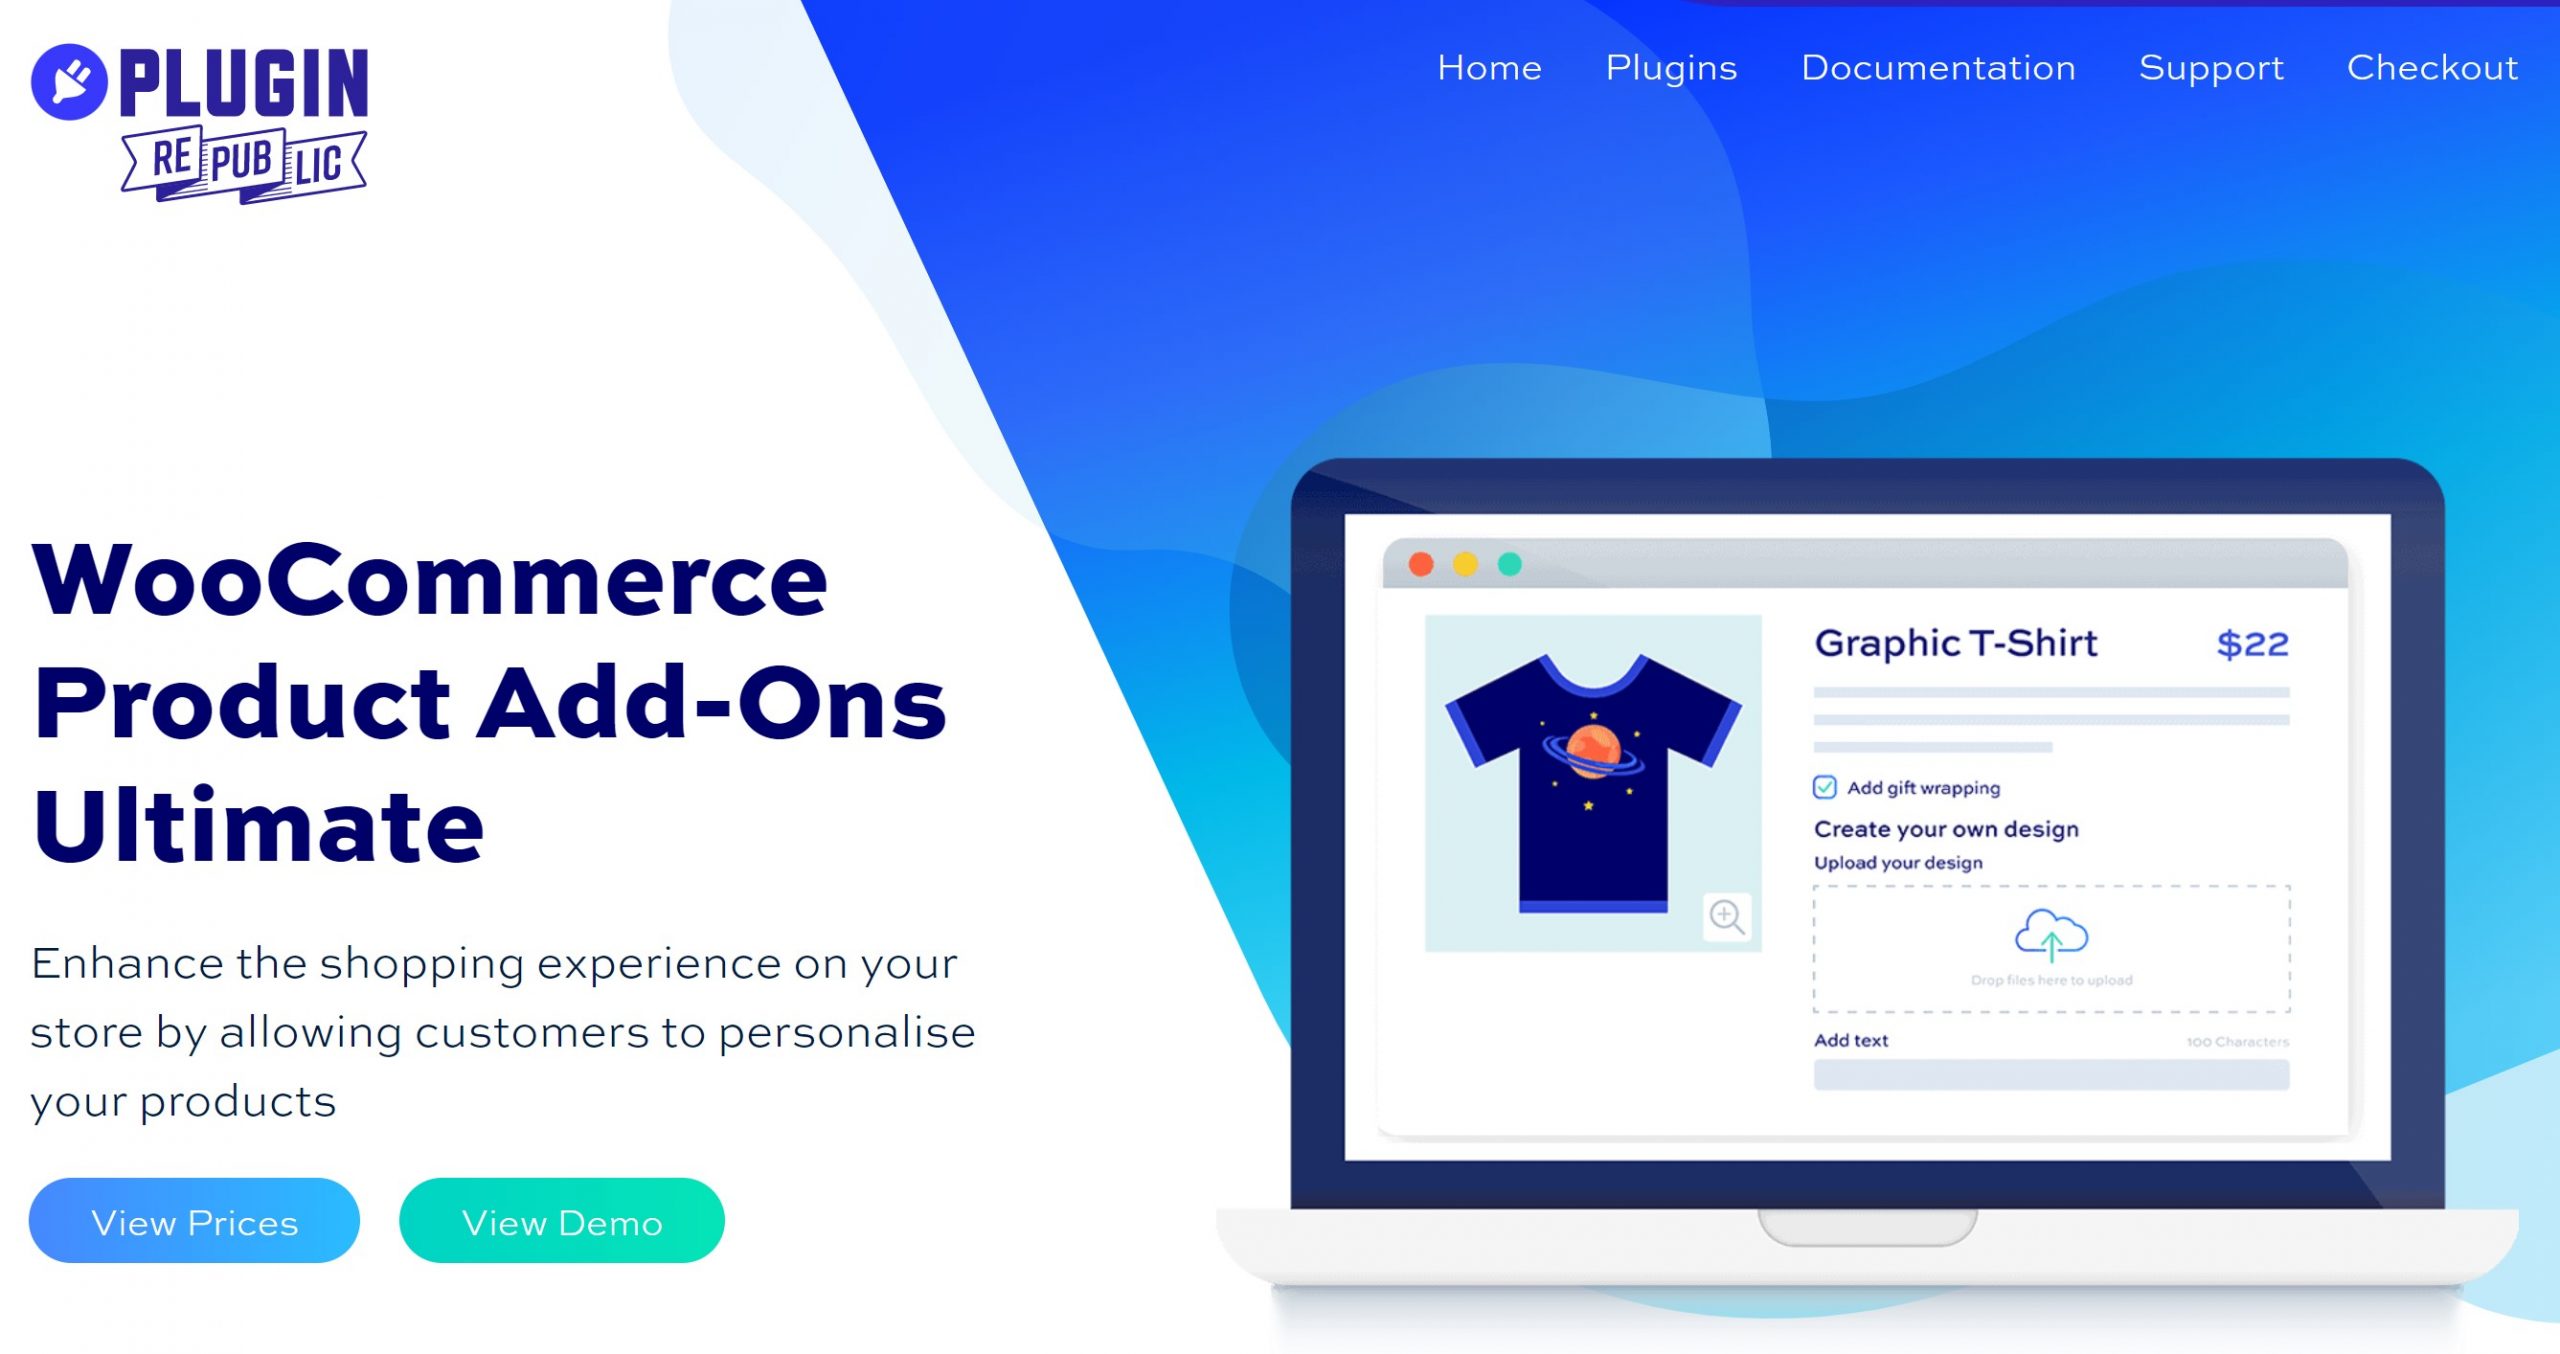 WooCommerce Product Add-Ons Ultimate 3.11.6 by Plugin Republic